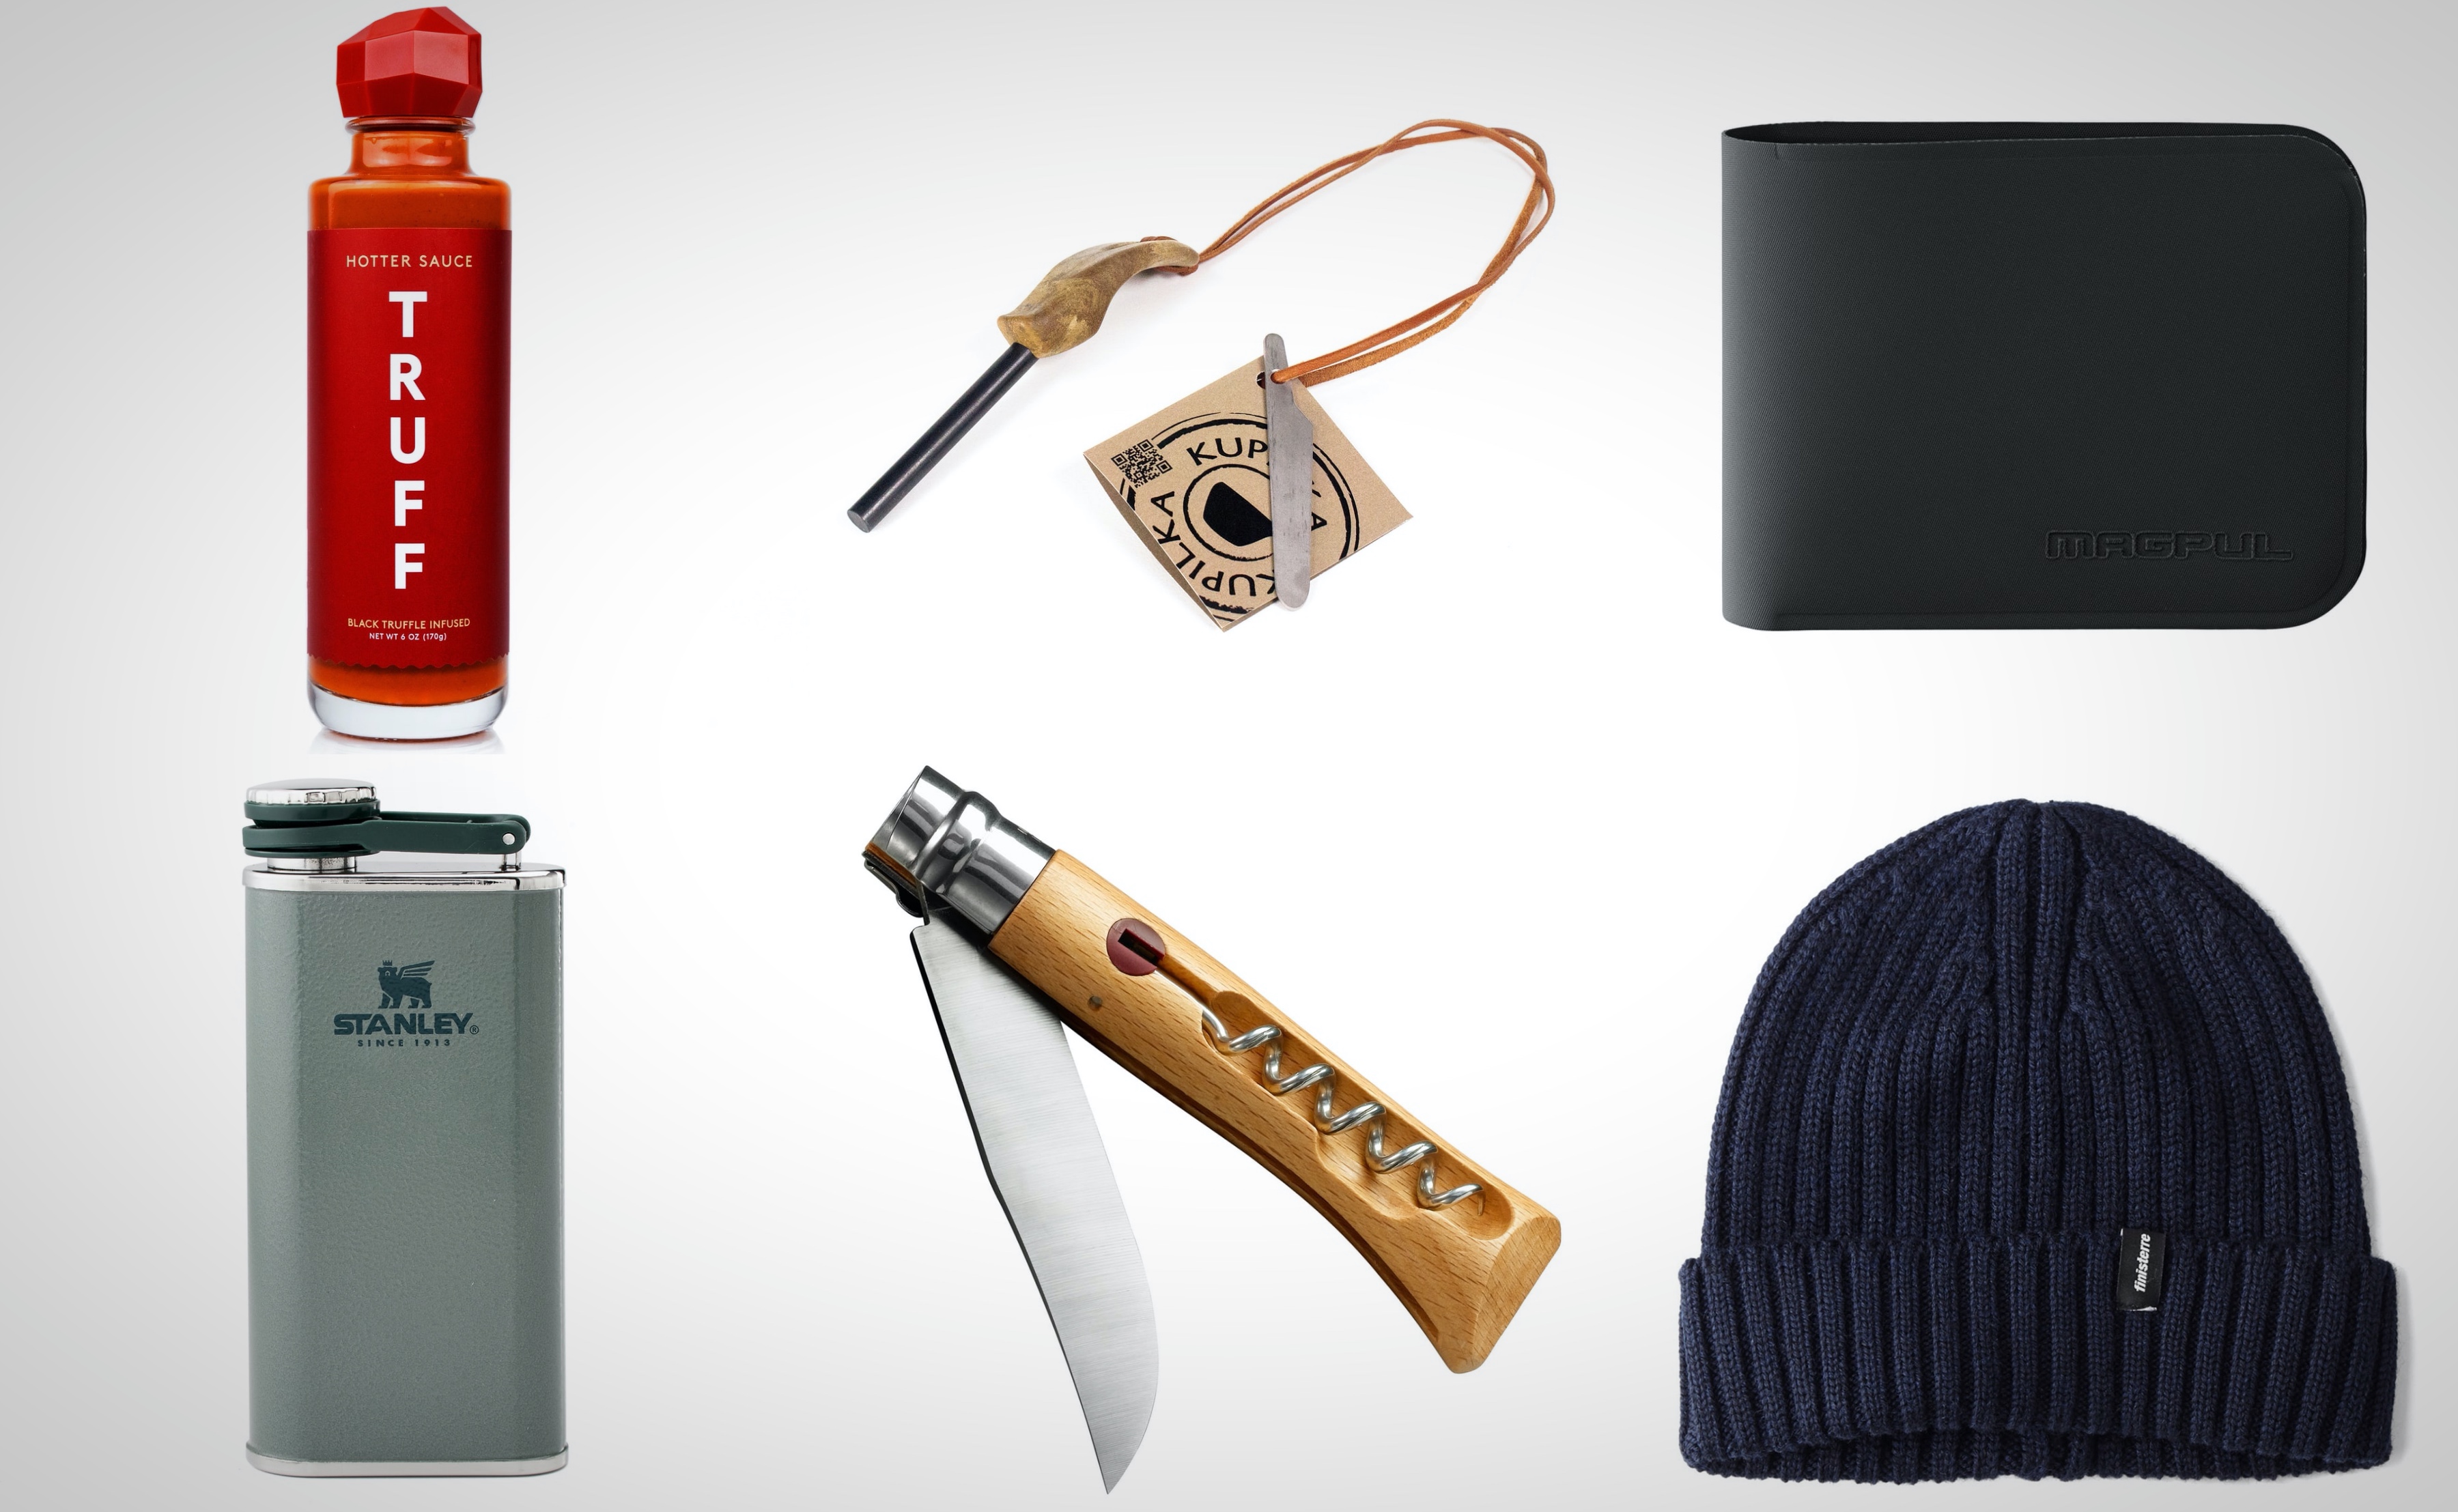 Time After Time's 2019 Valentine's Day Gift Guide for Men